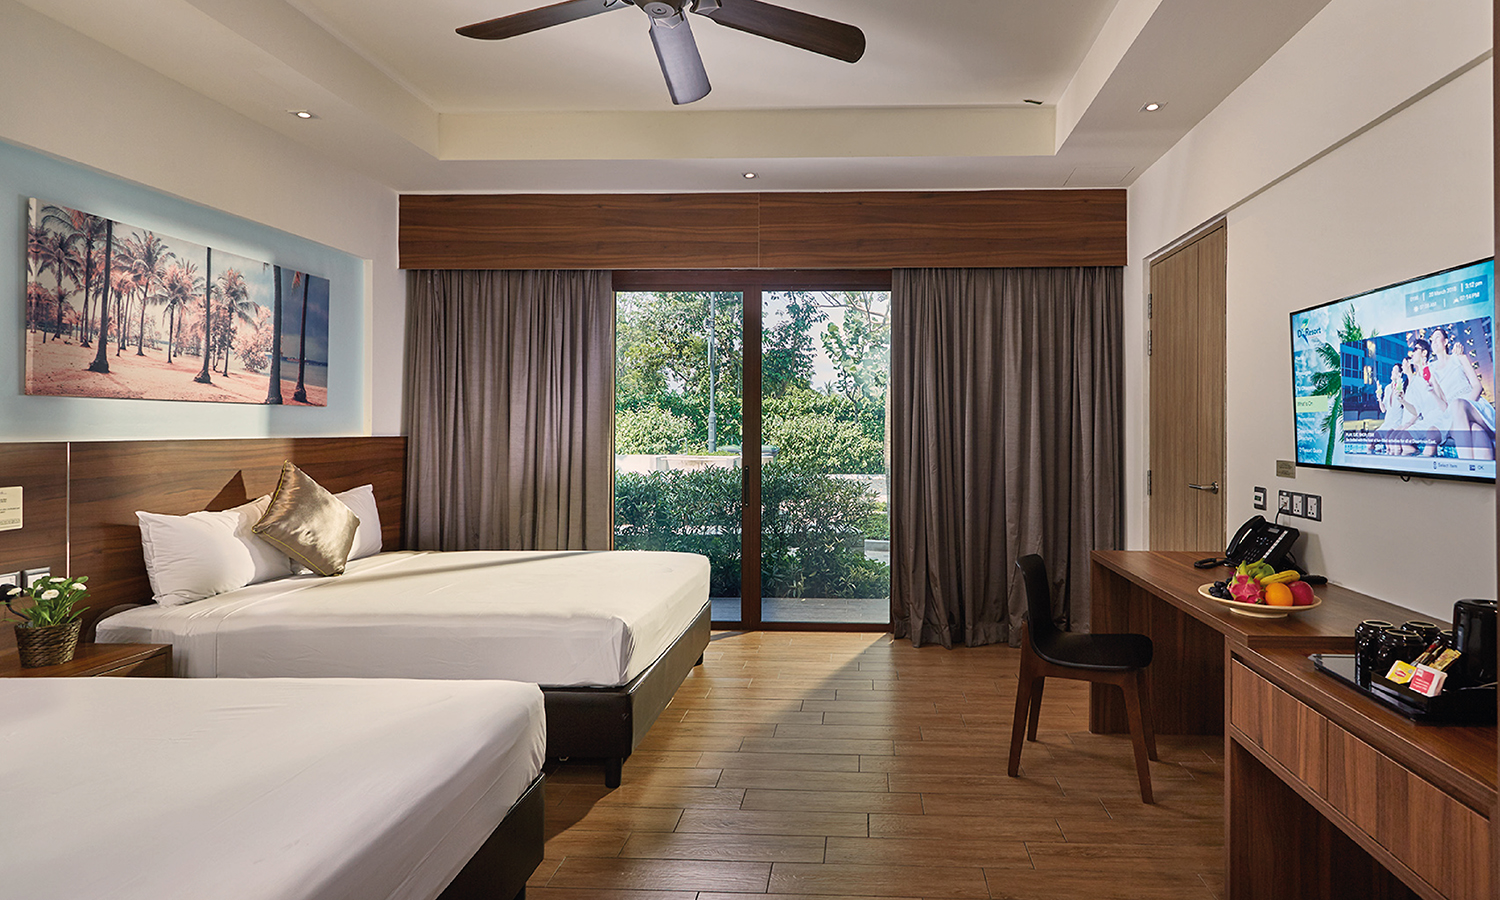 Beach Cove - Rooms for staycation at D'Resort Singapore